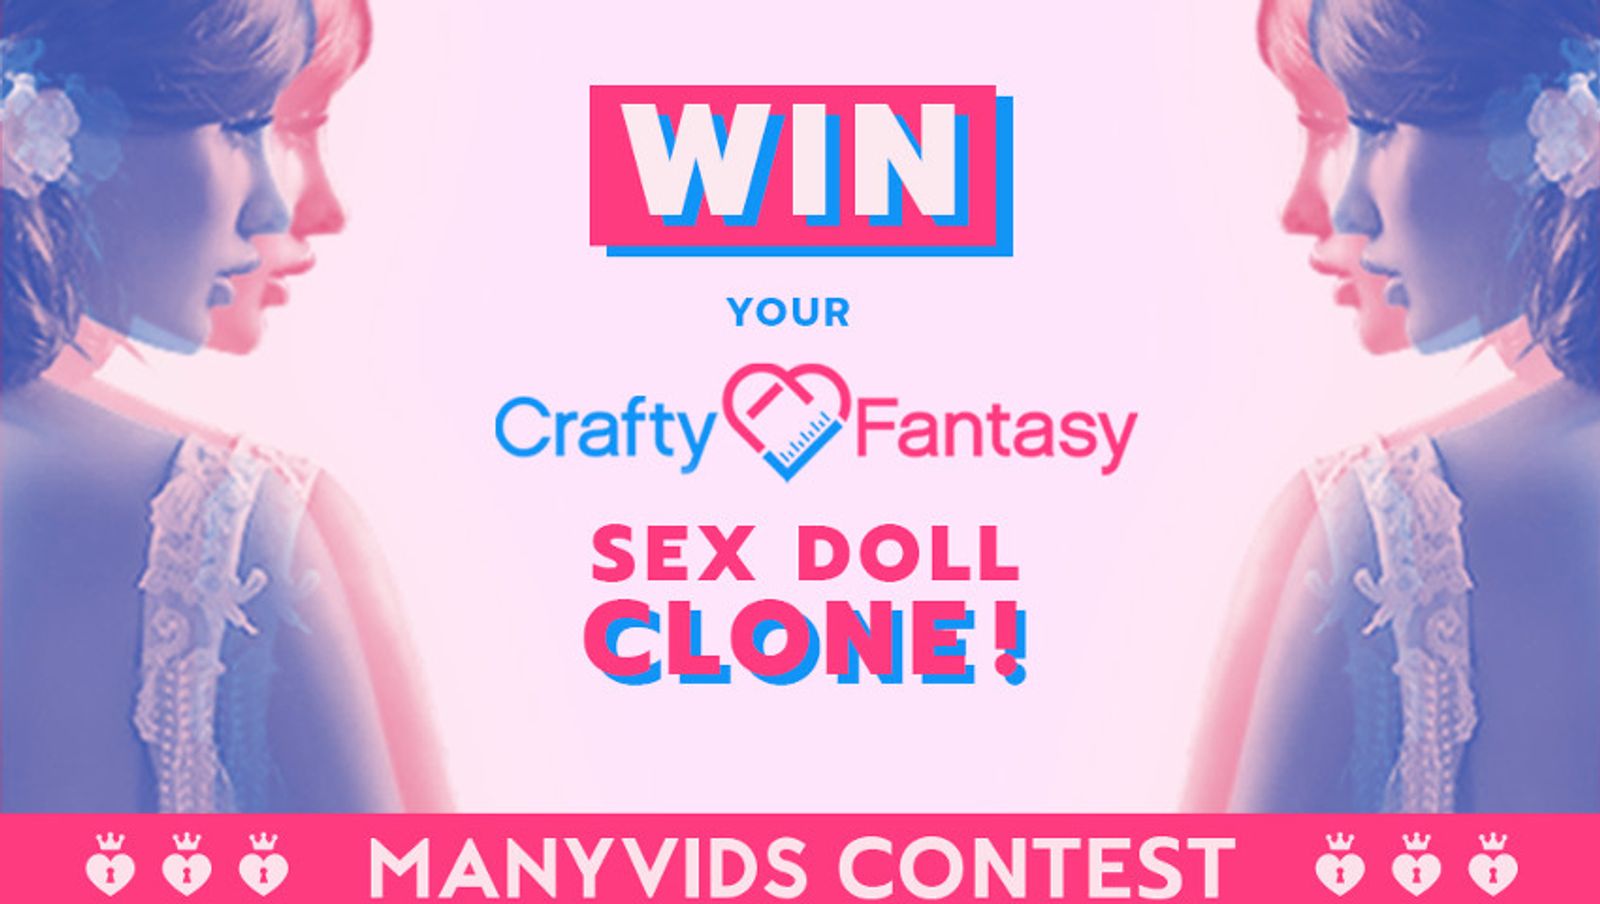 ManyVids Launches Crafty Fantasy Sex Doll Giveaway Contest